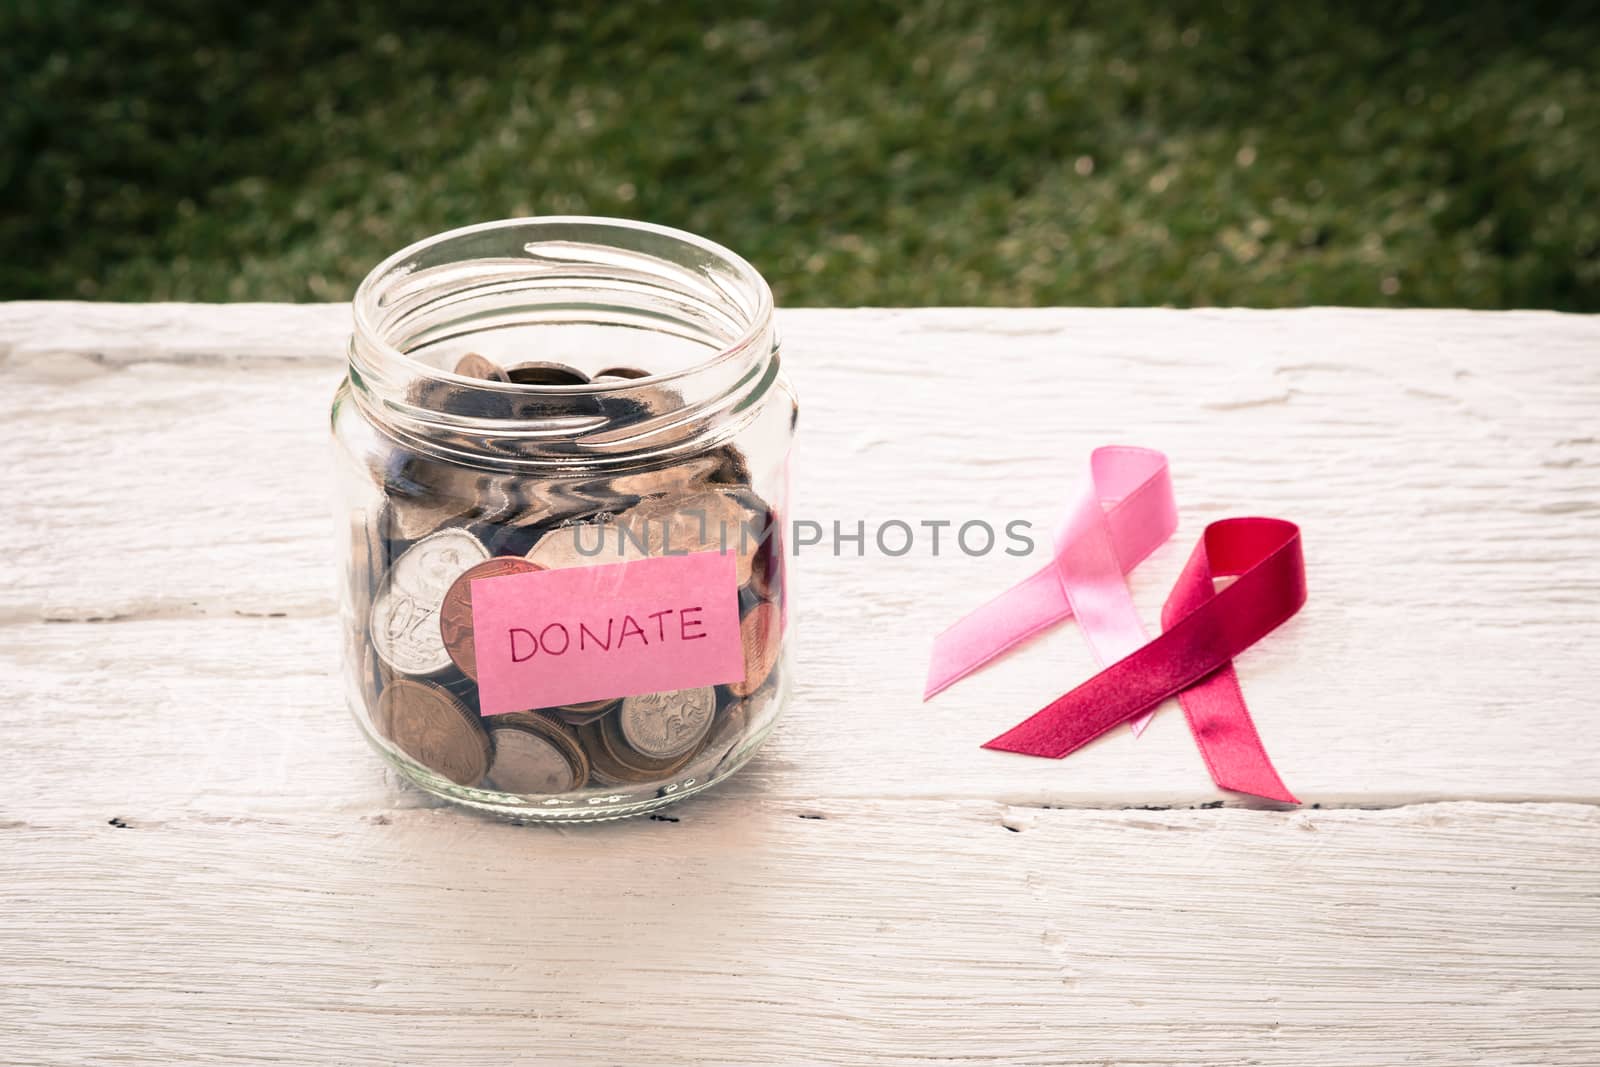 World coins in money glass jar with pink DONATE word label place on white wood table with two breast cancer ribbon signs, vintage and retro style image with vignette